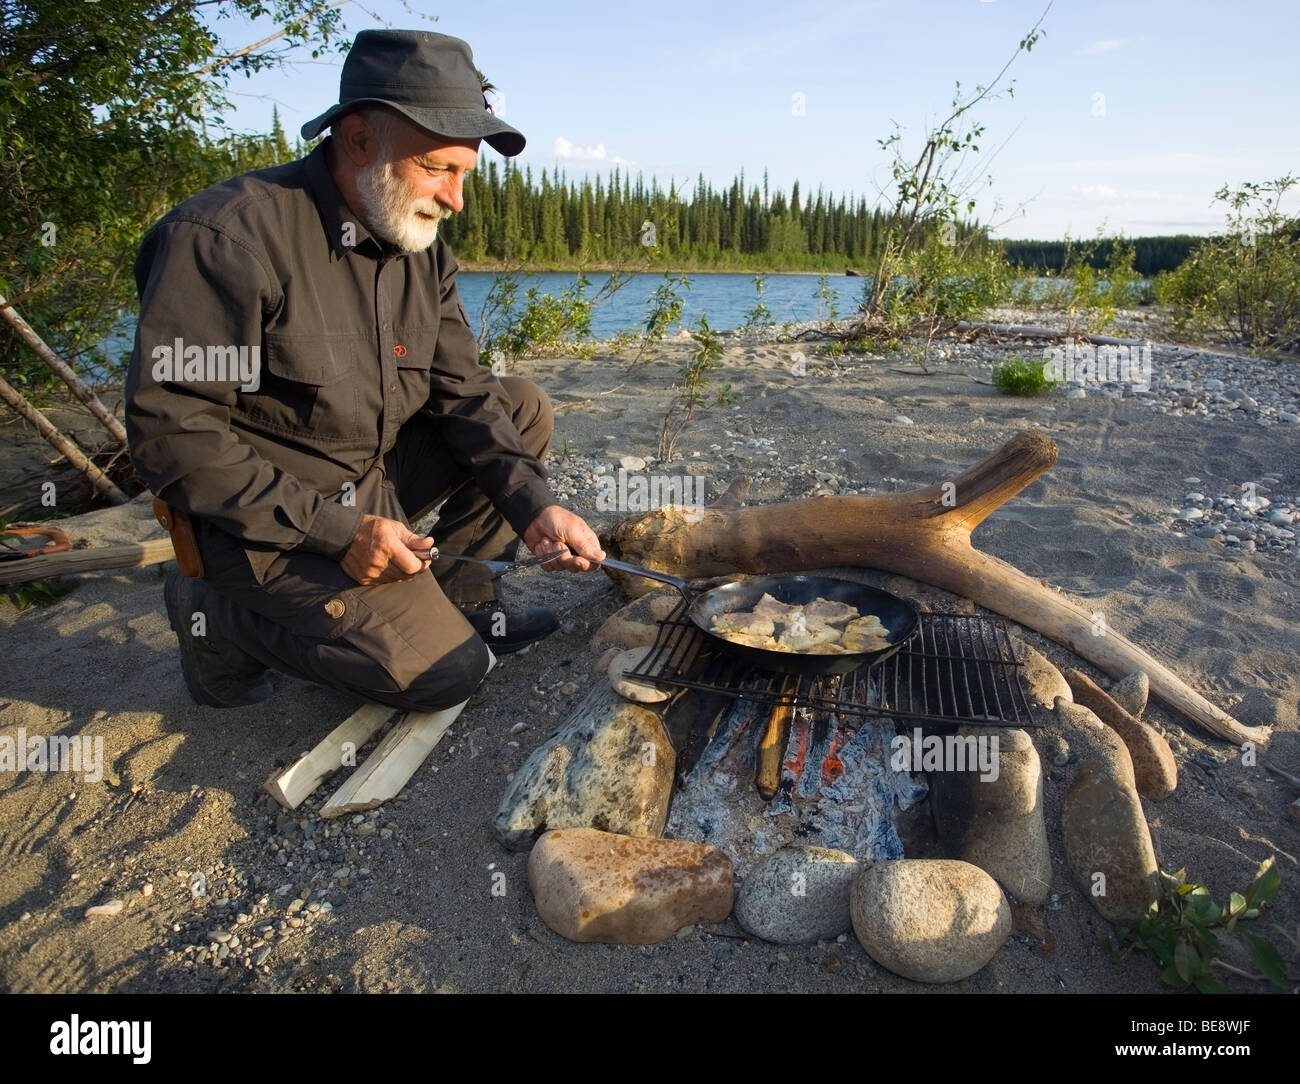 Man cooking, frying fish fillets in a pan on a camp fire, upper Liard River, Yukon Territory, Canada Stock Photo